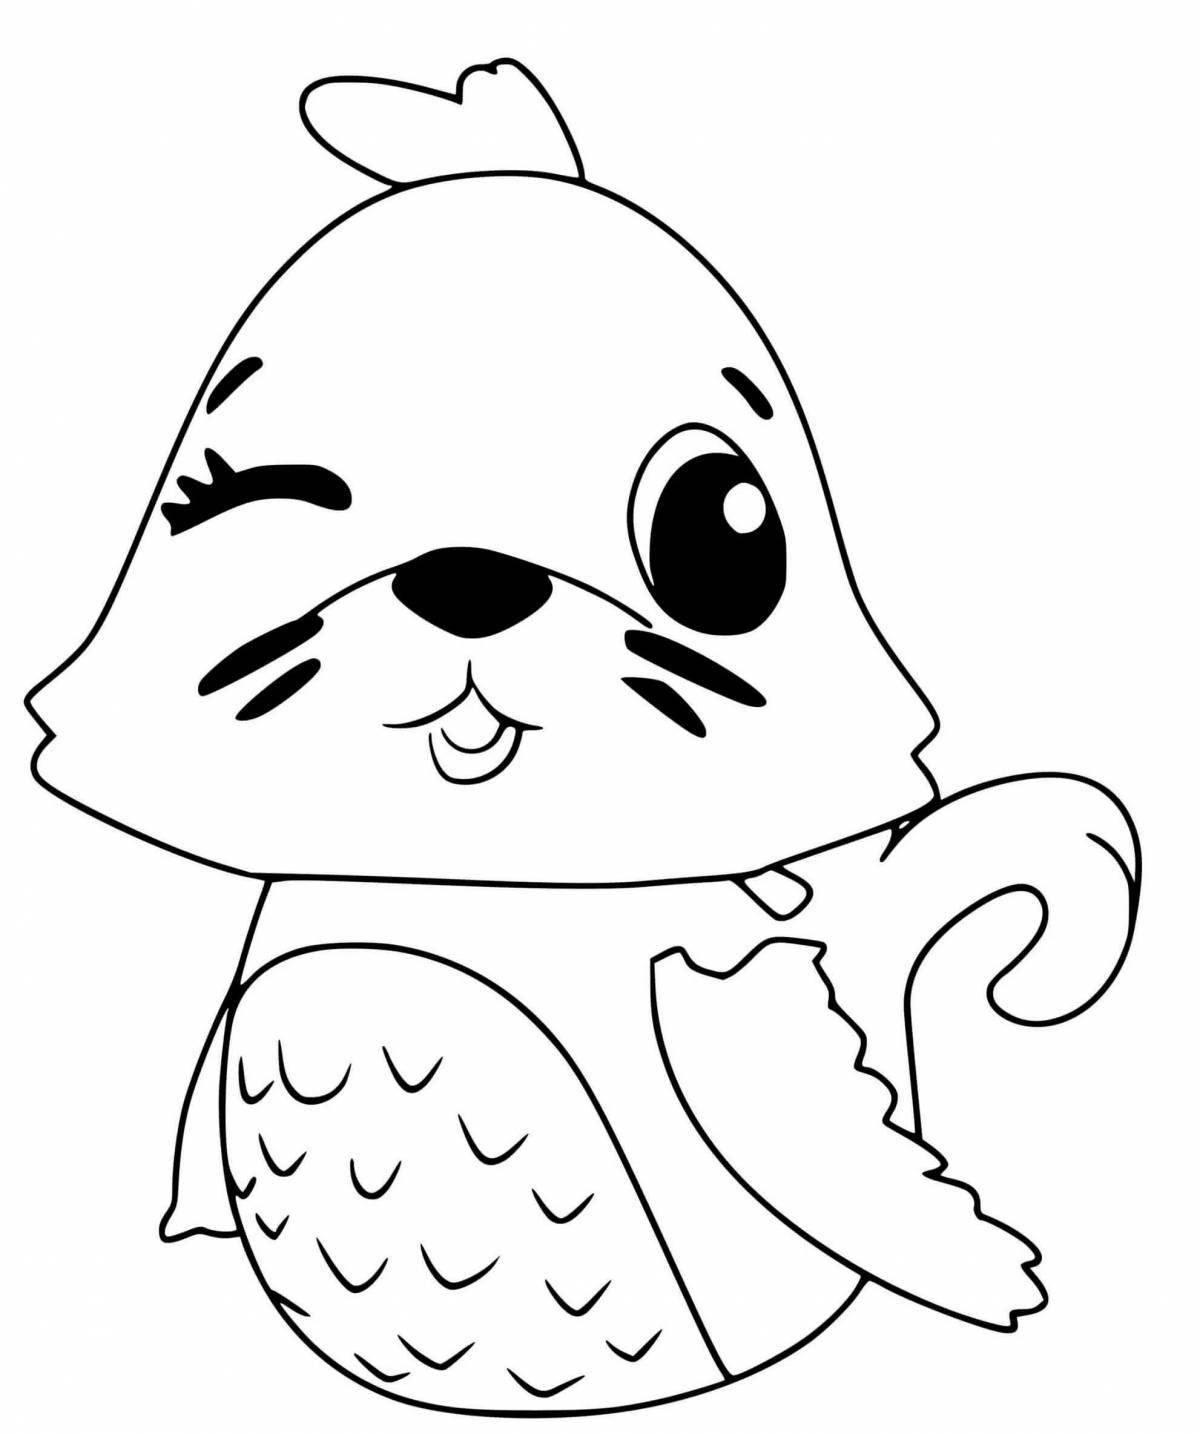 Awesome hechimols coloring pages